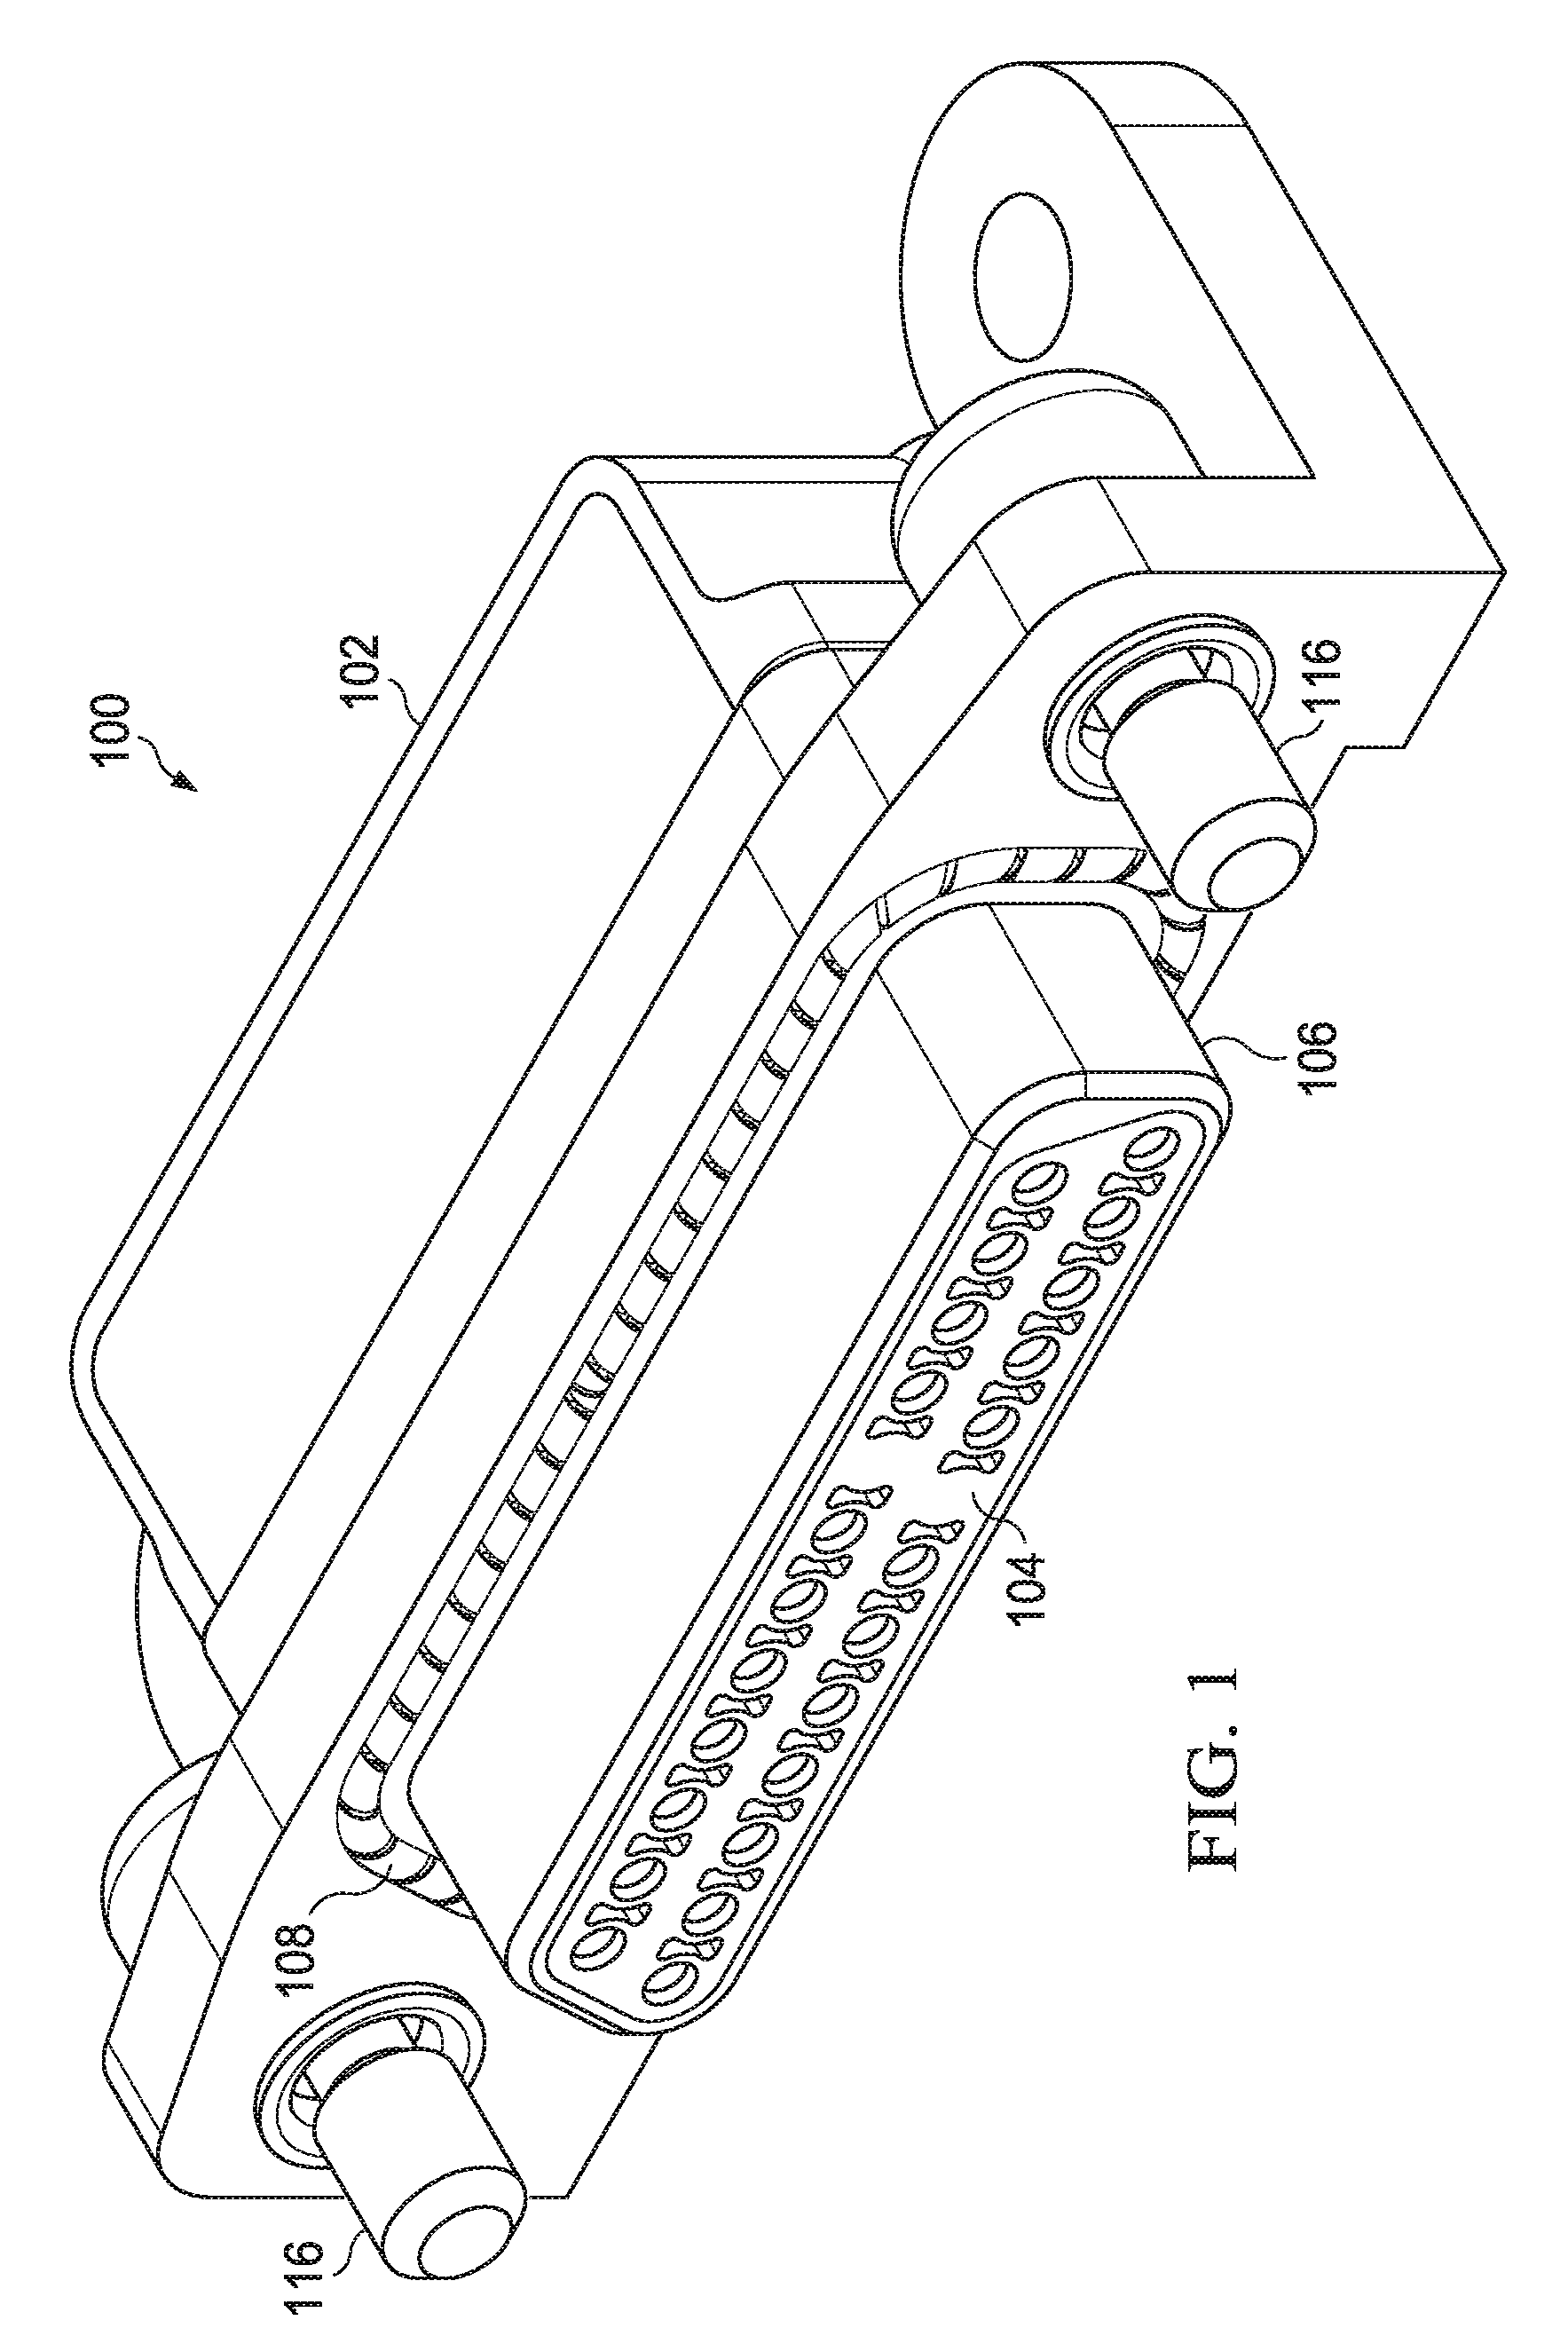 Insulator with air dielectric cavities for electrical connector